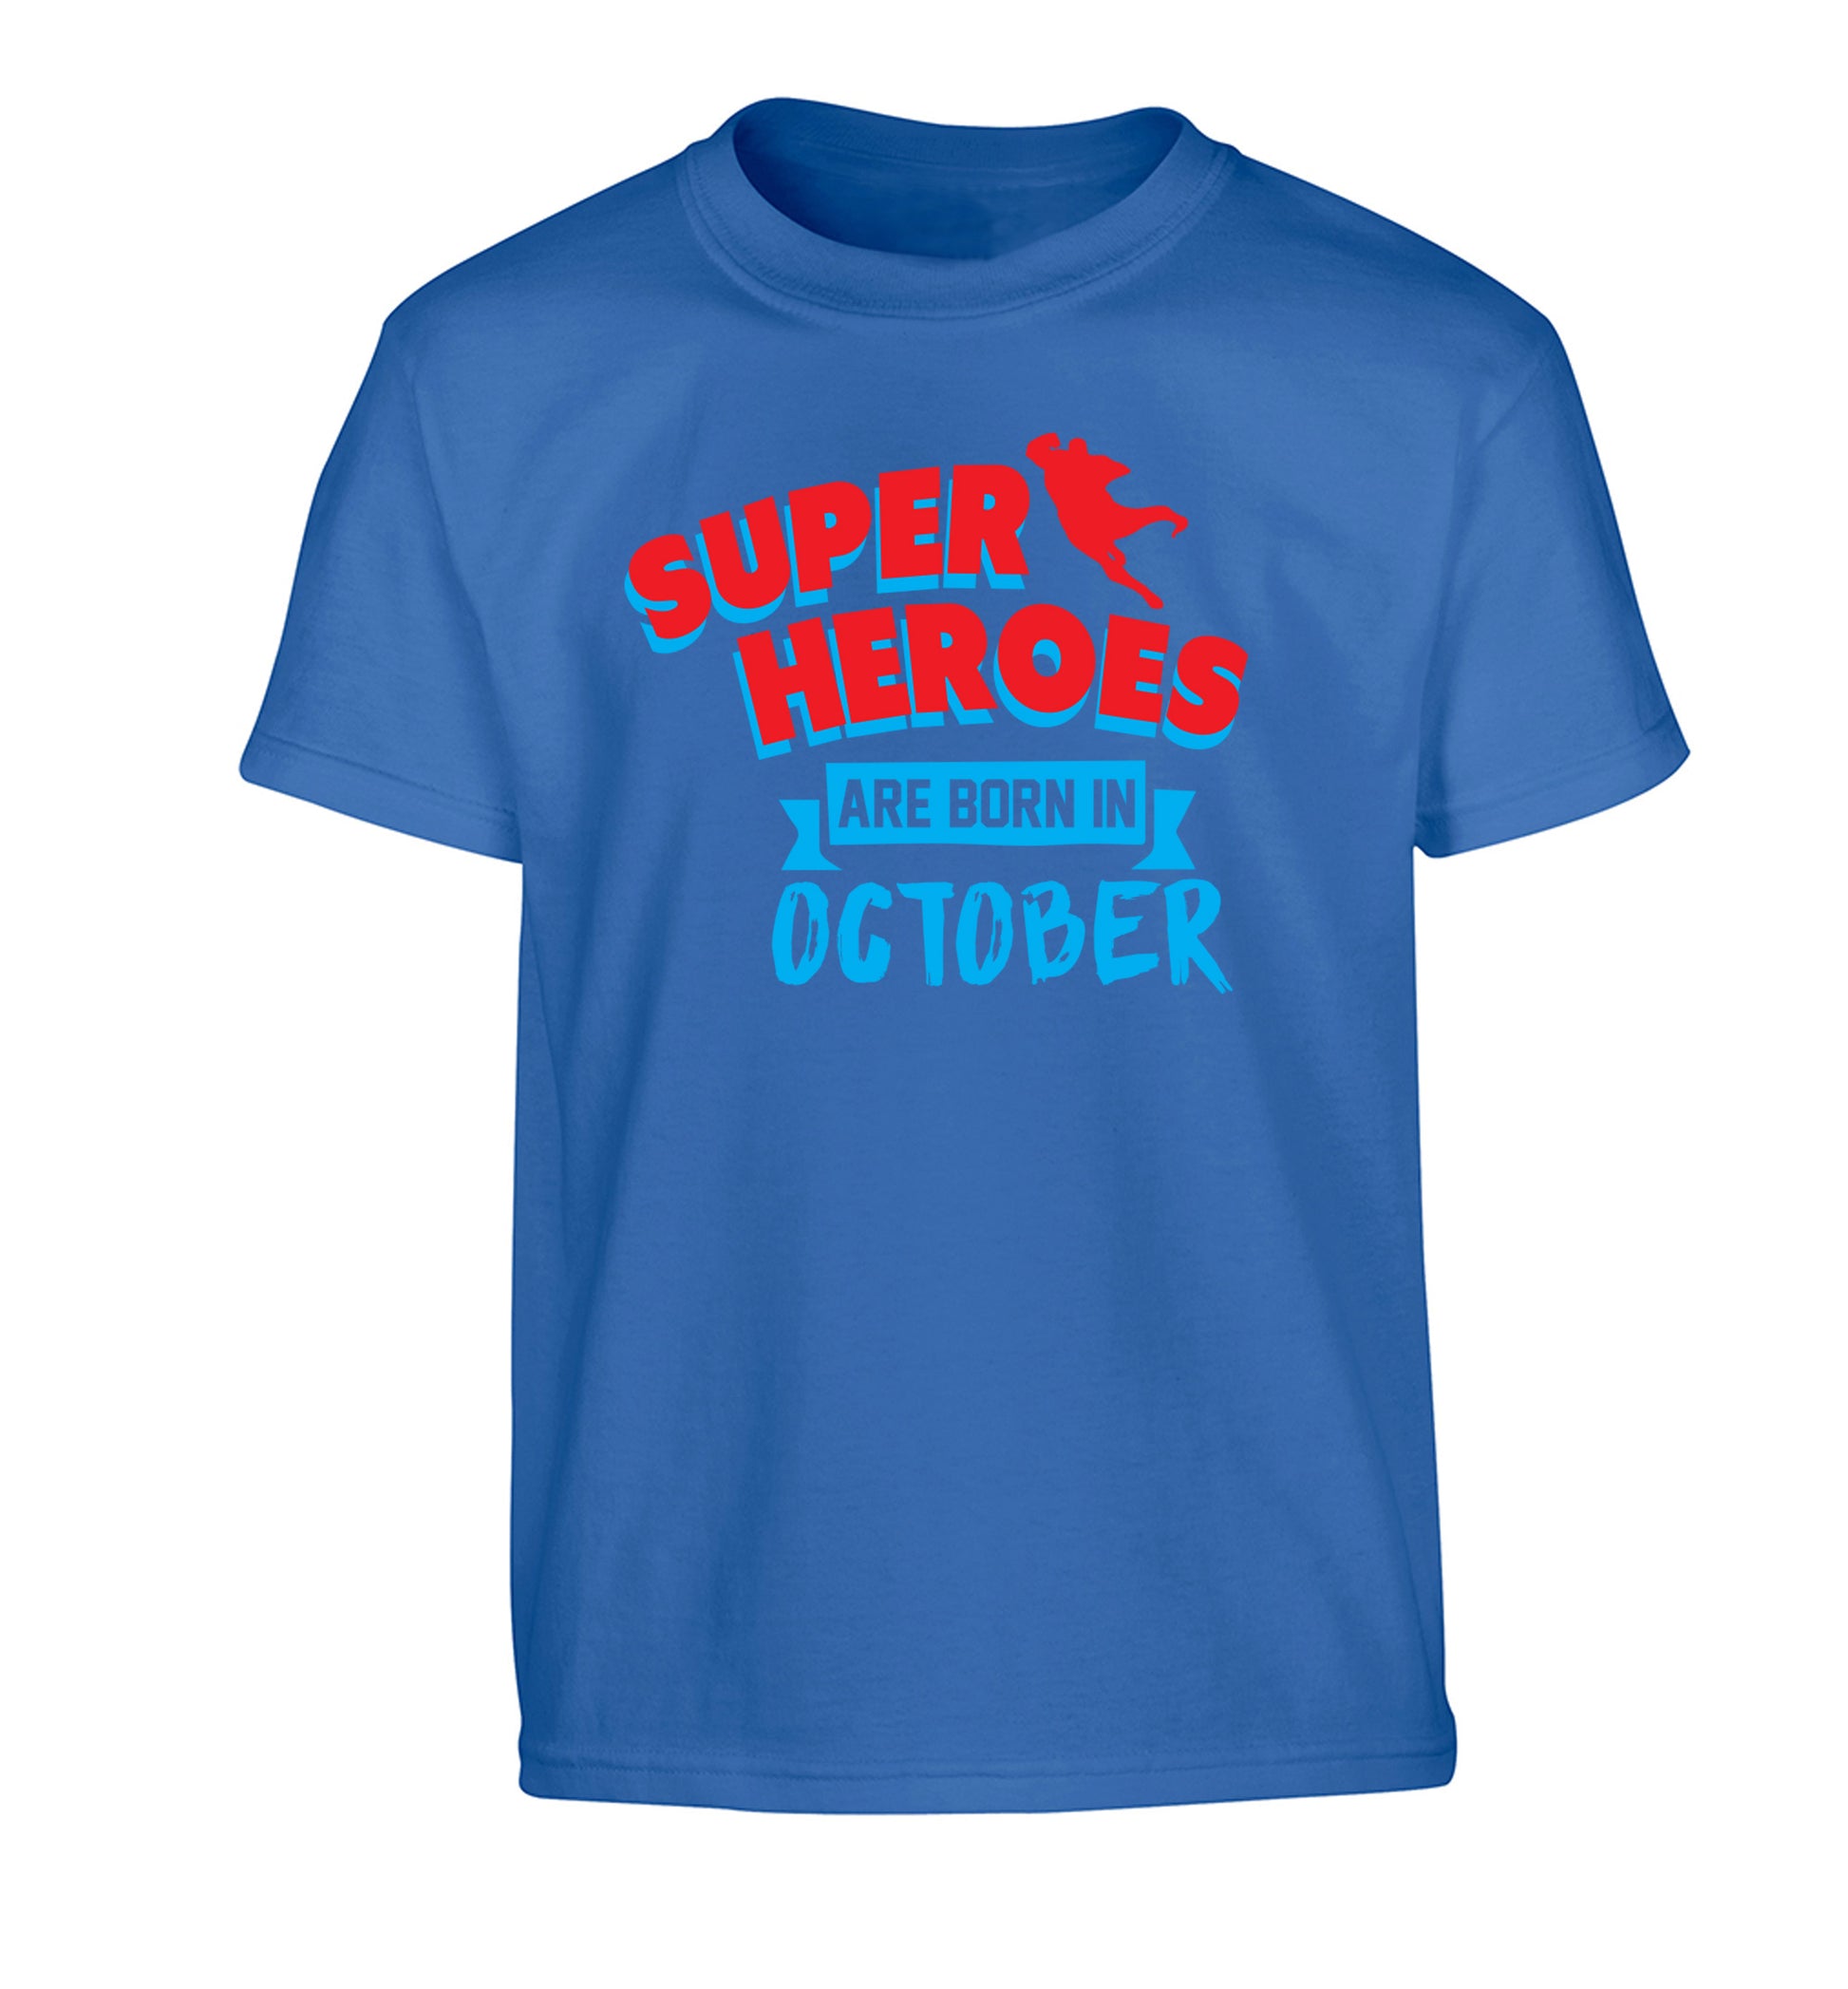 Superheroes are born in October Children's blue Tshirt 12-13 Years